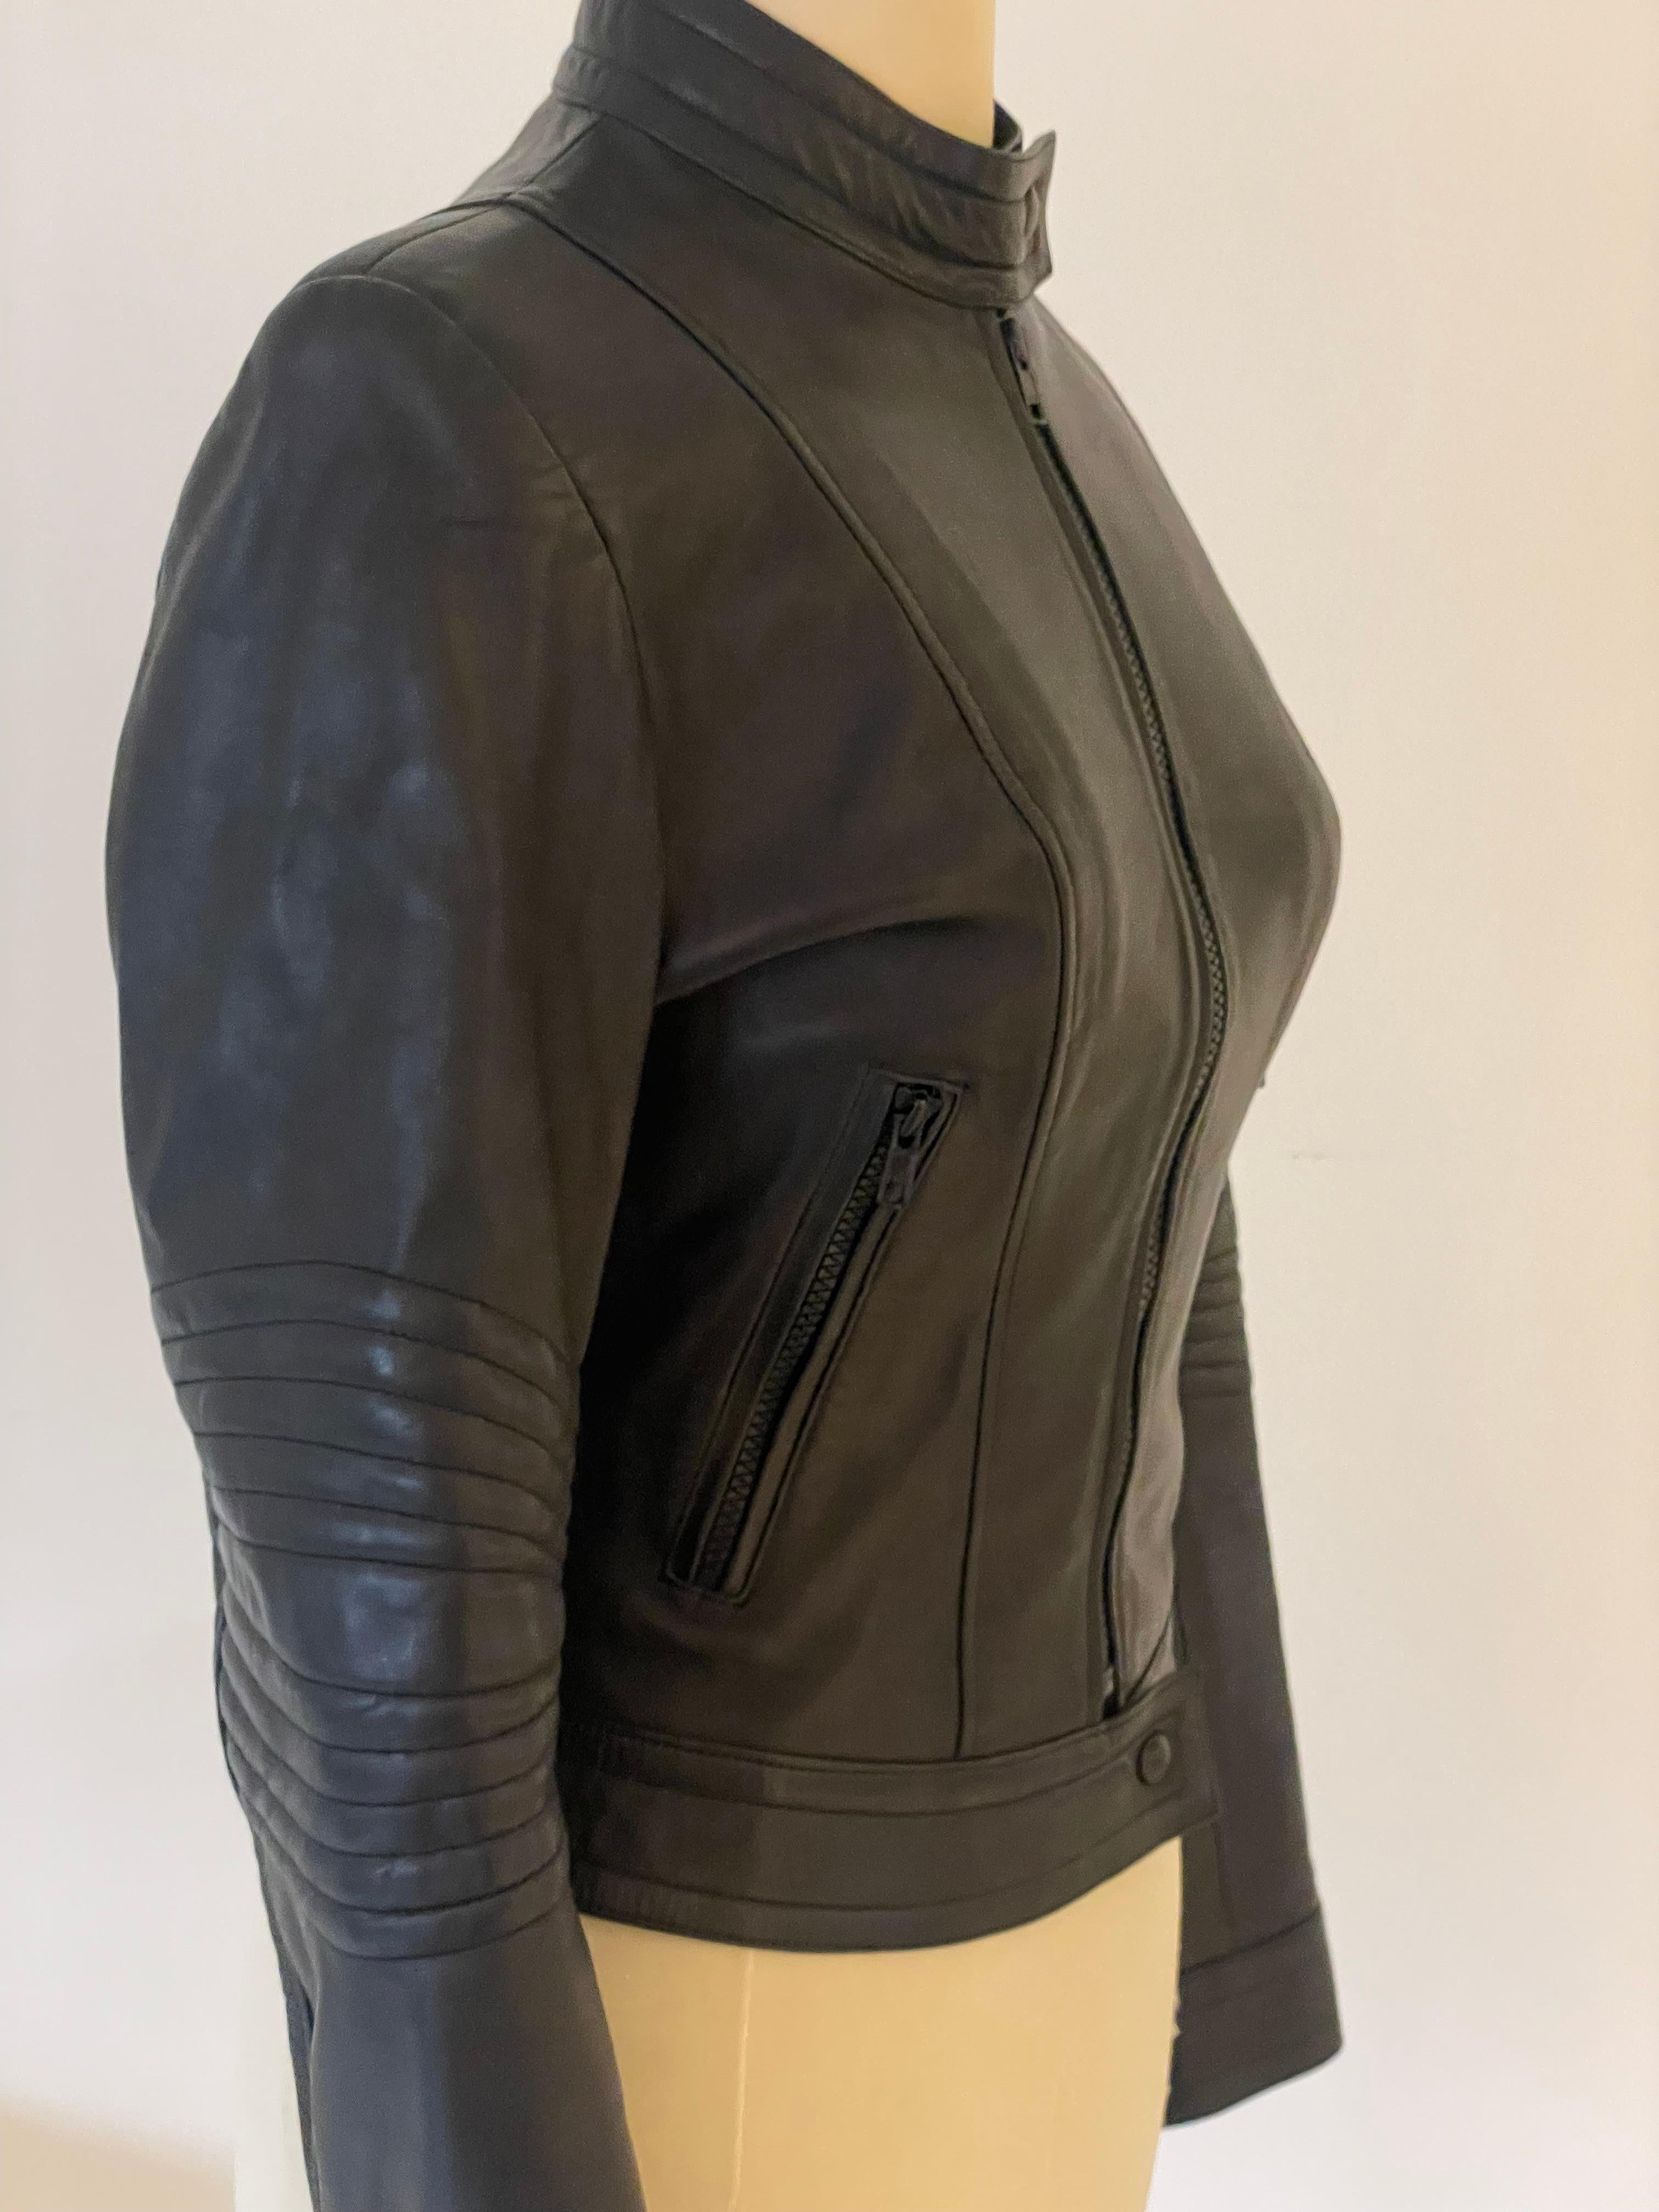 Very UNIQUE item this JEAN CLAUDE JITROIS vintage black leather ribbed MOTO BIKE JACKET from the 90s. Snap button collar. Zip front. Ribbed detailing at elbow. Jean-Claude Jitrois is a French fashion designer known for his work with leather. He is